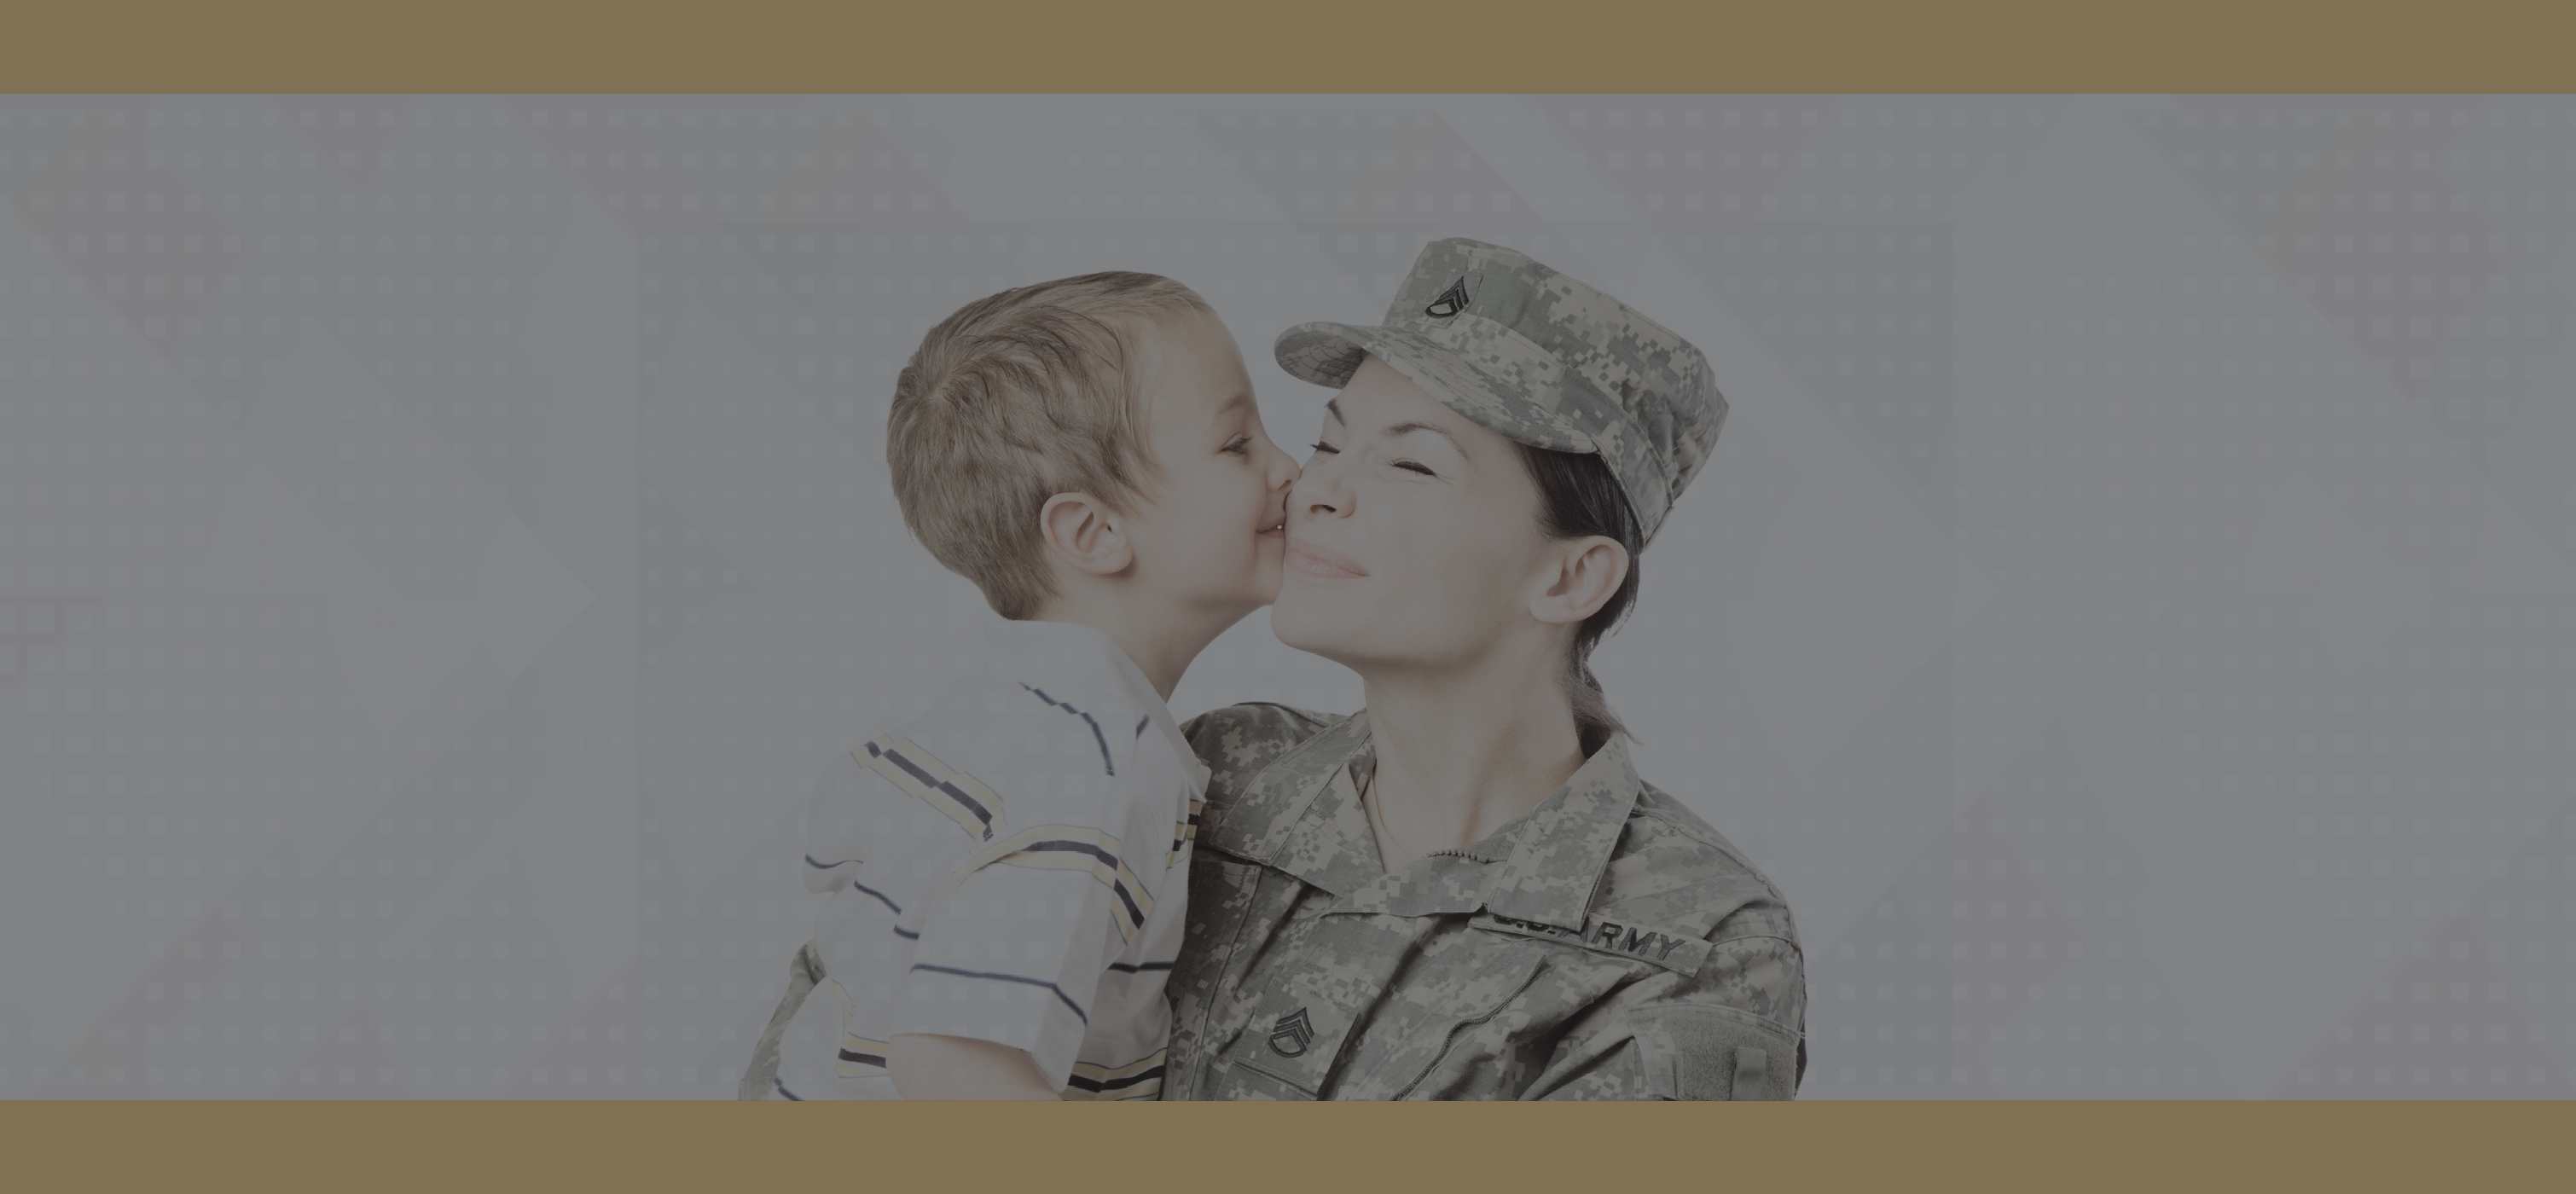 Person in military garb holding a kid who is kissing them on the cheek